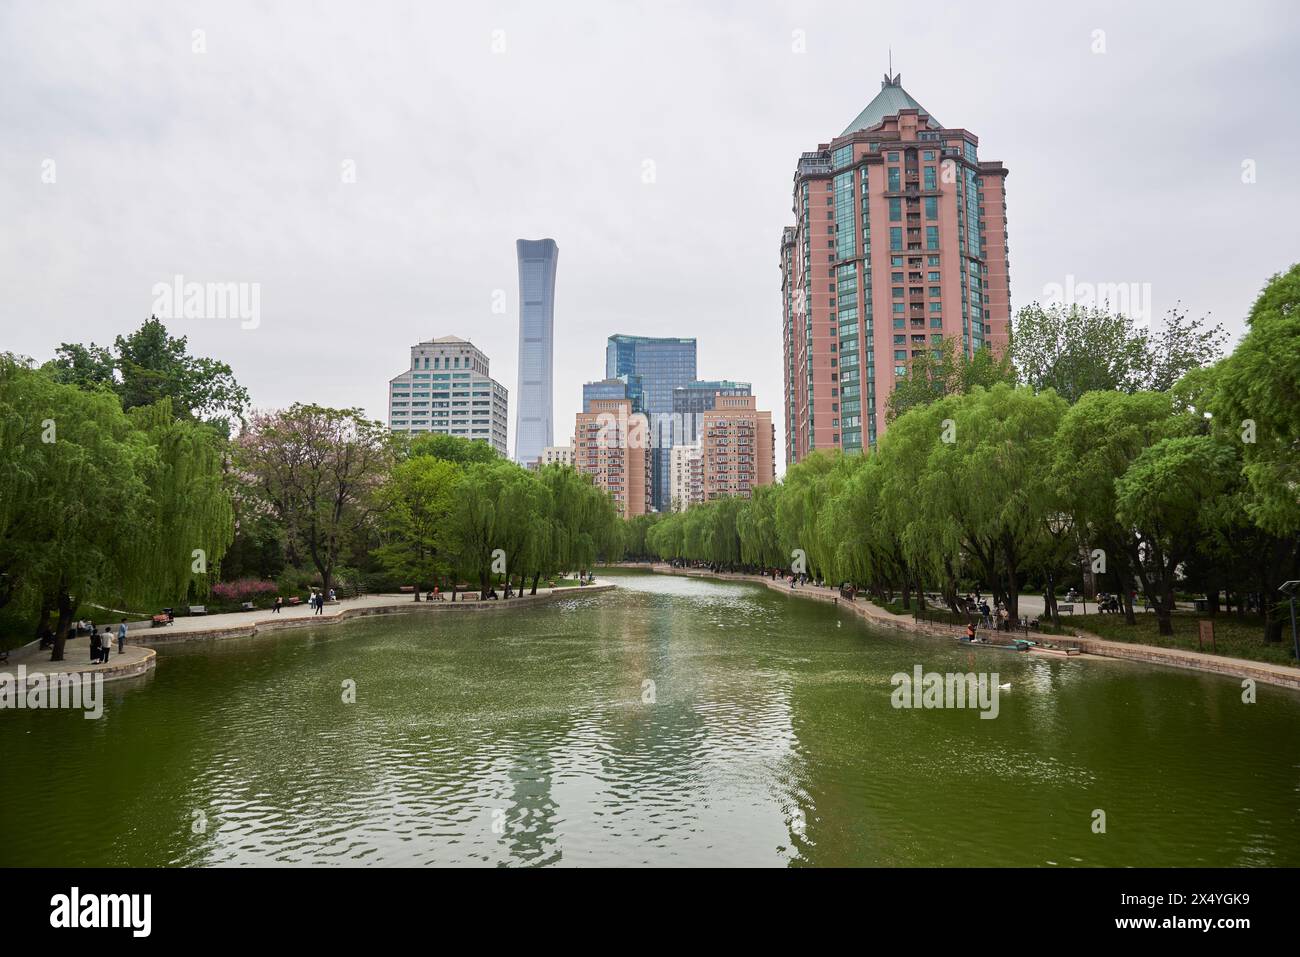 Scenery of Tuanjiehu public city park in spring, in Chaoyang district of Beijing, capital of China, with skyscrapers of Central Business District in t Stock Photo